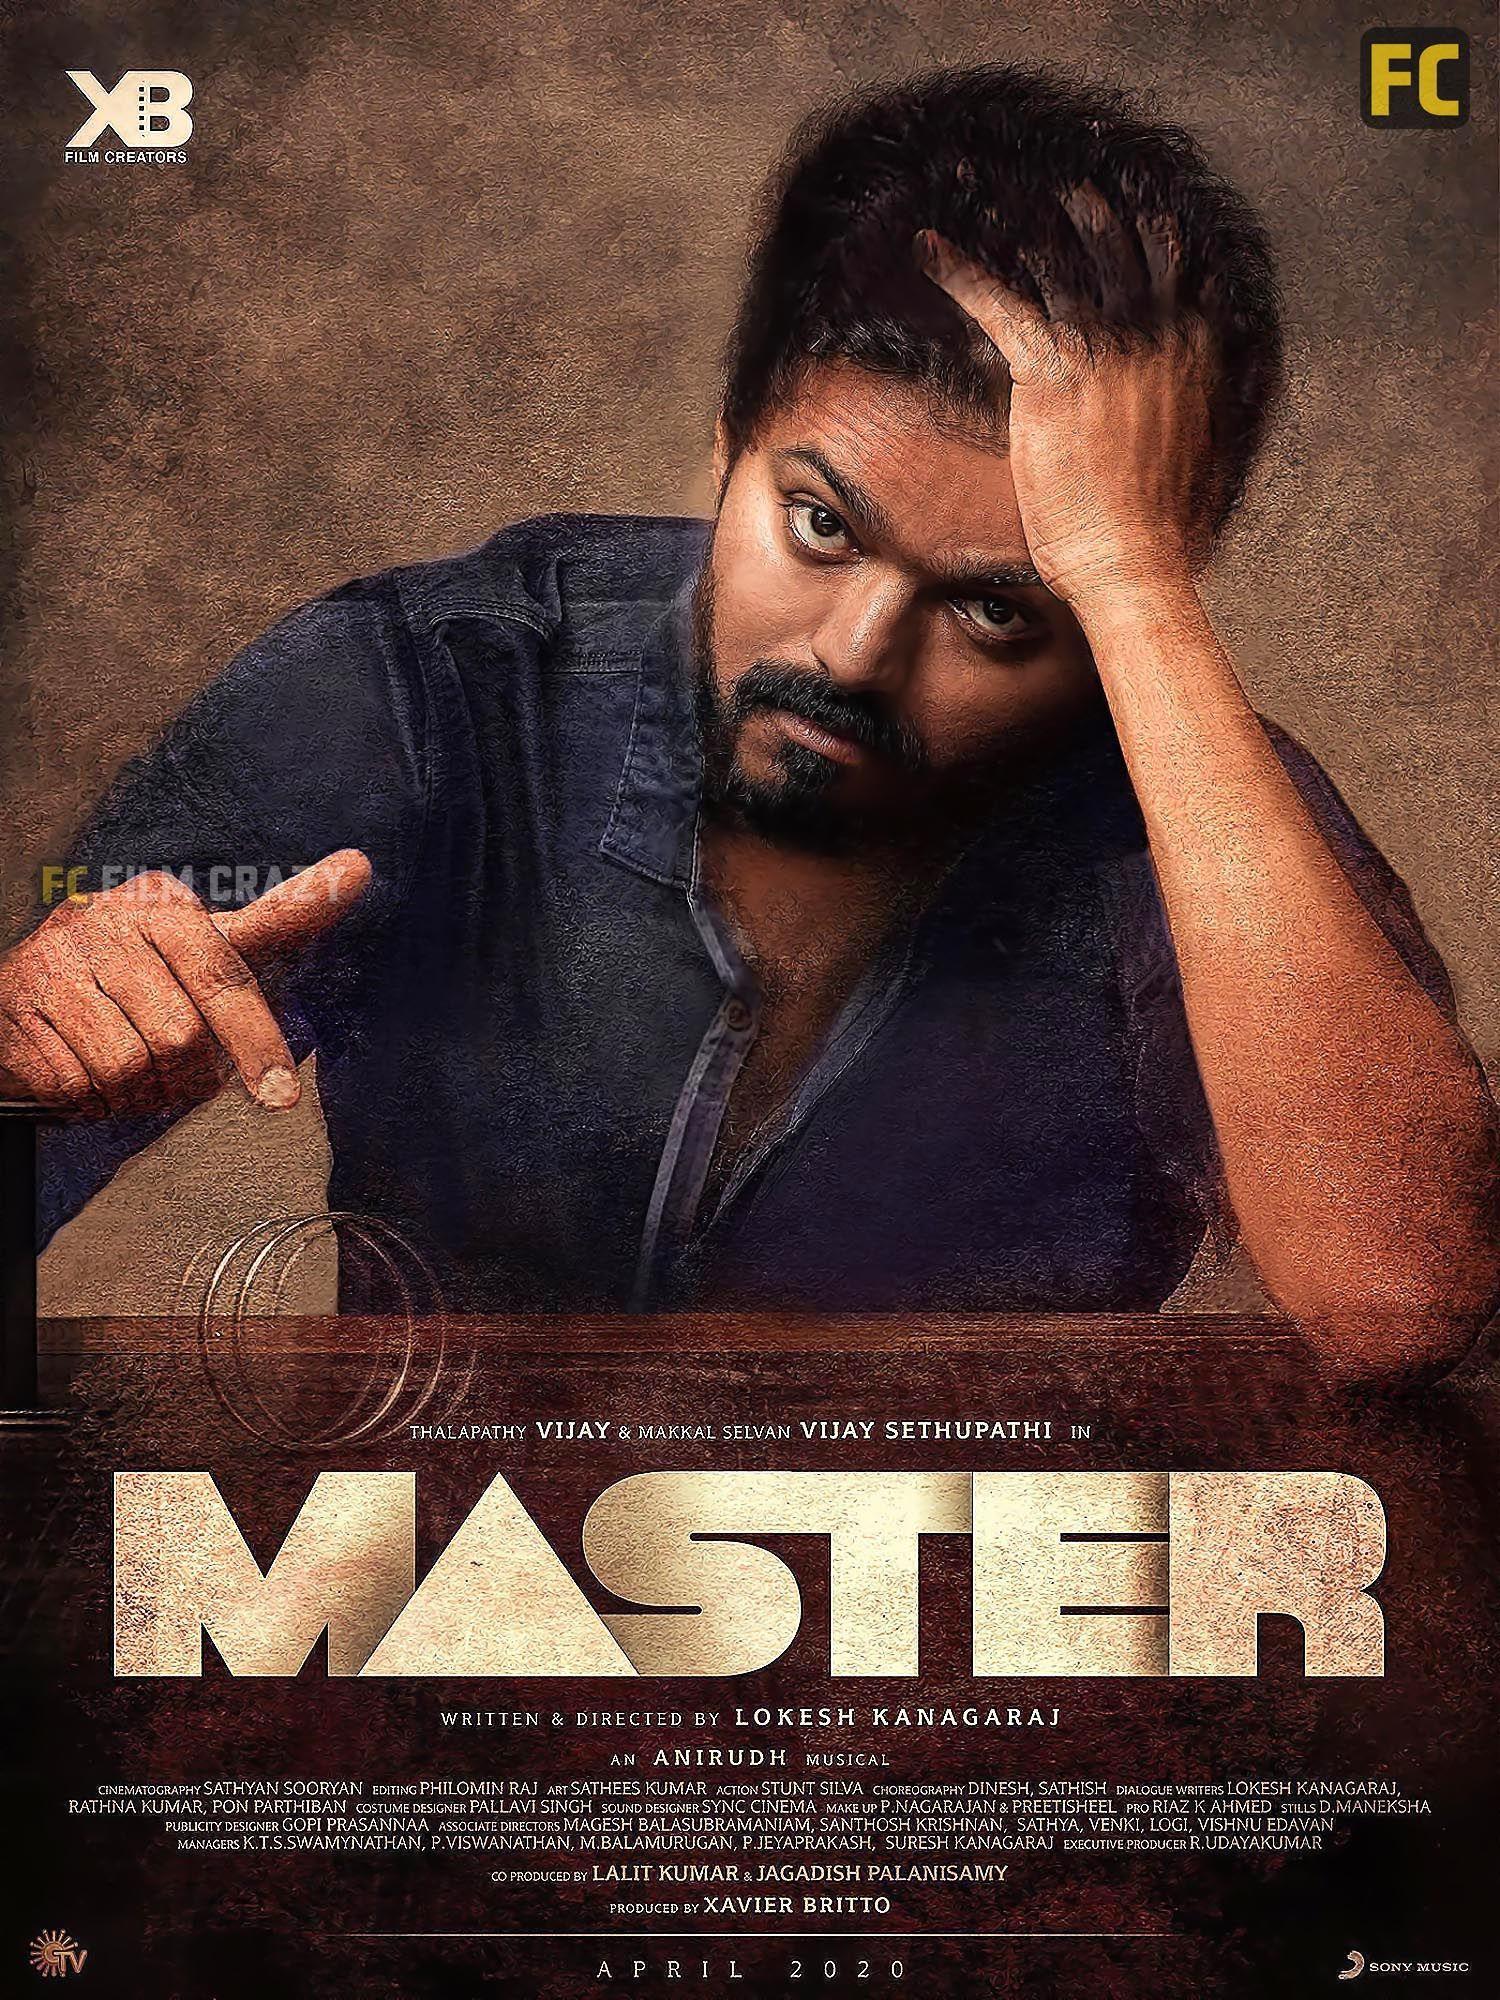 Master Vijay Wallpapers Top Free Master Vijay Backgrounds Wallpaperaccess Wallpapers in ultra hd 4k 3840x2160, 1920x1080 high definition resolutions. master vijay wallpapers top free